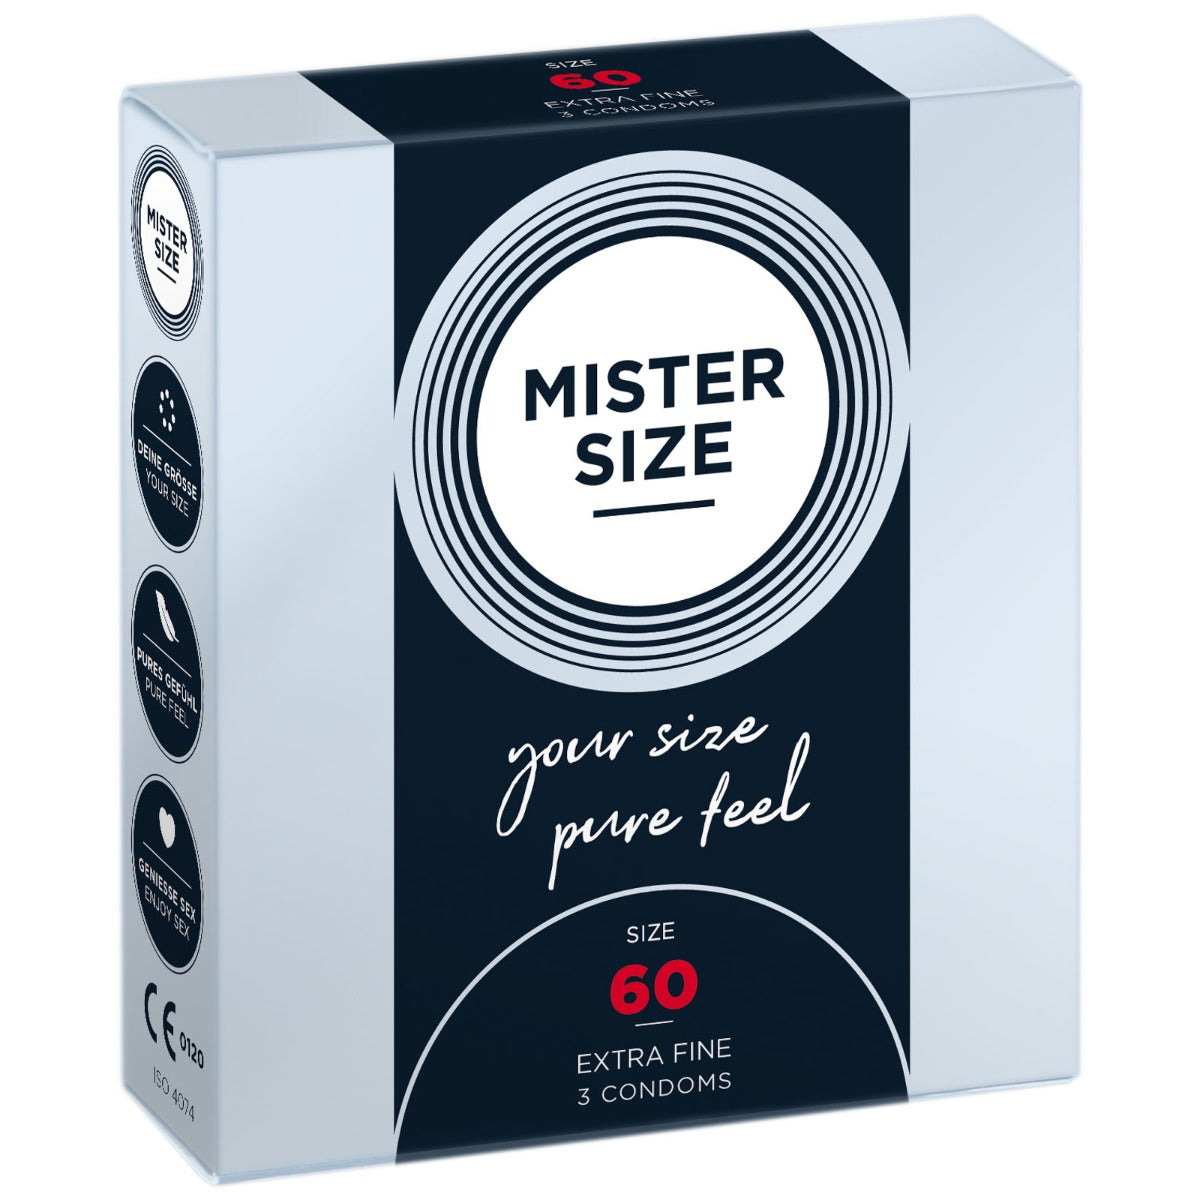 Mister Size Pure Feel Condoms 60mm (8085941747951)